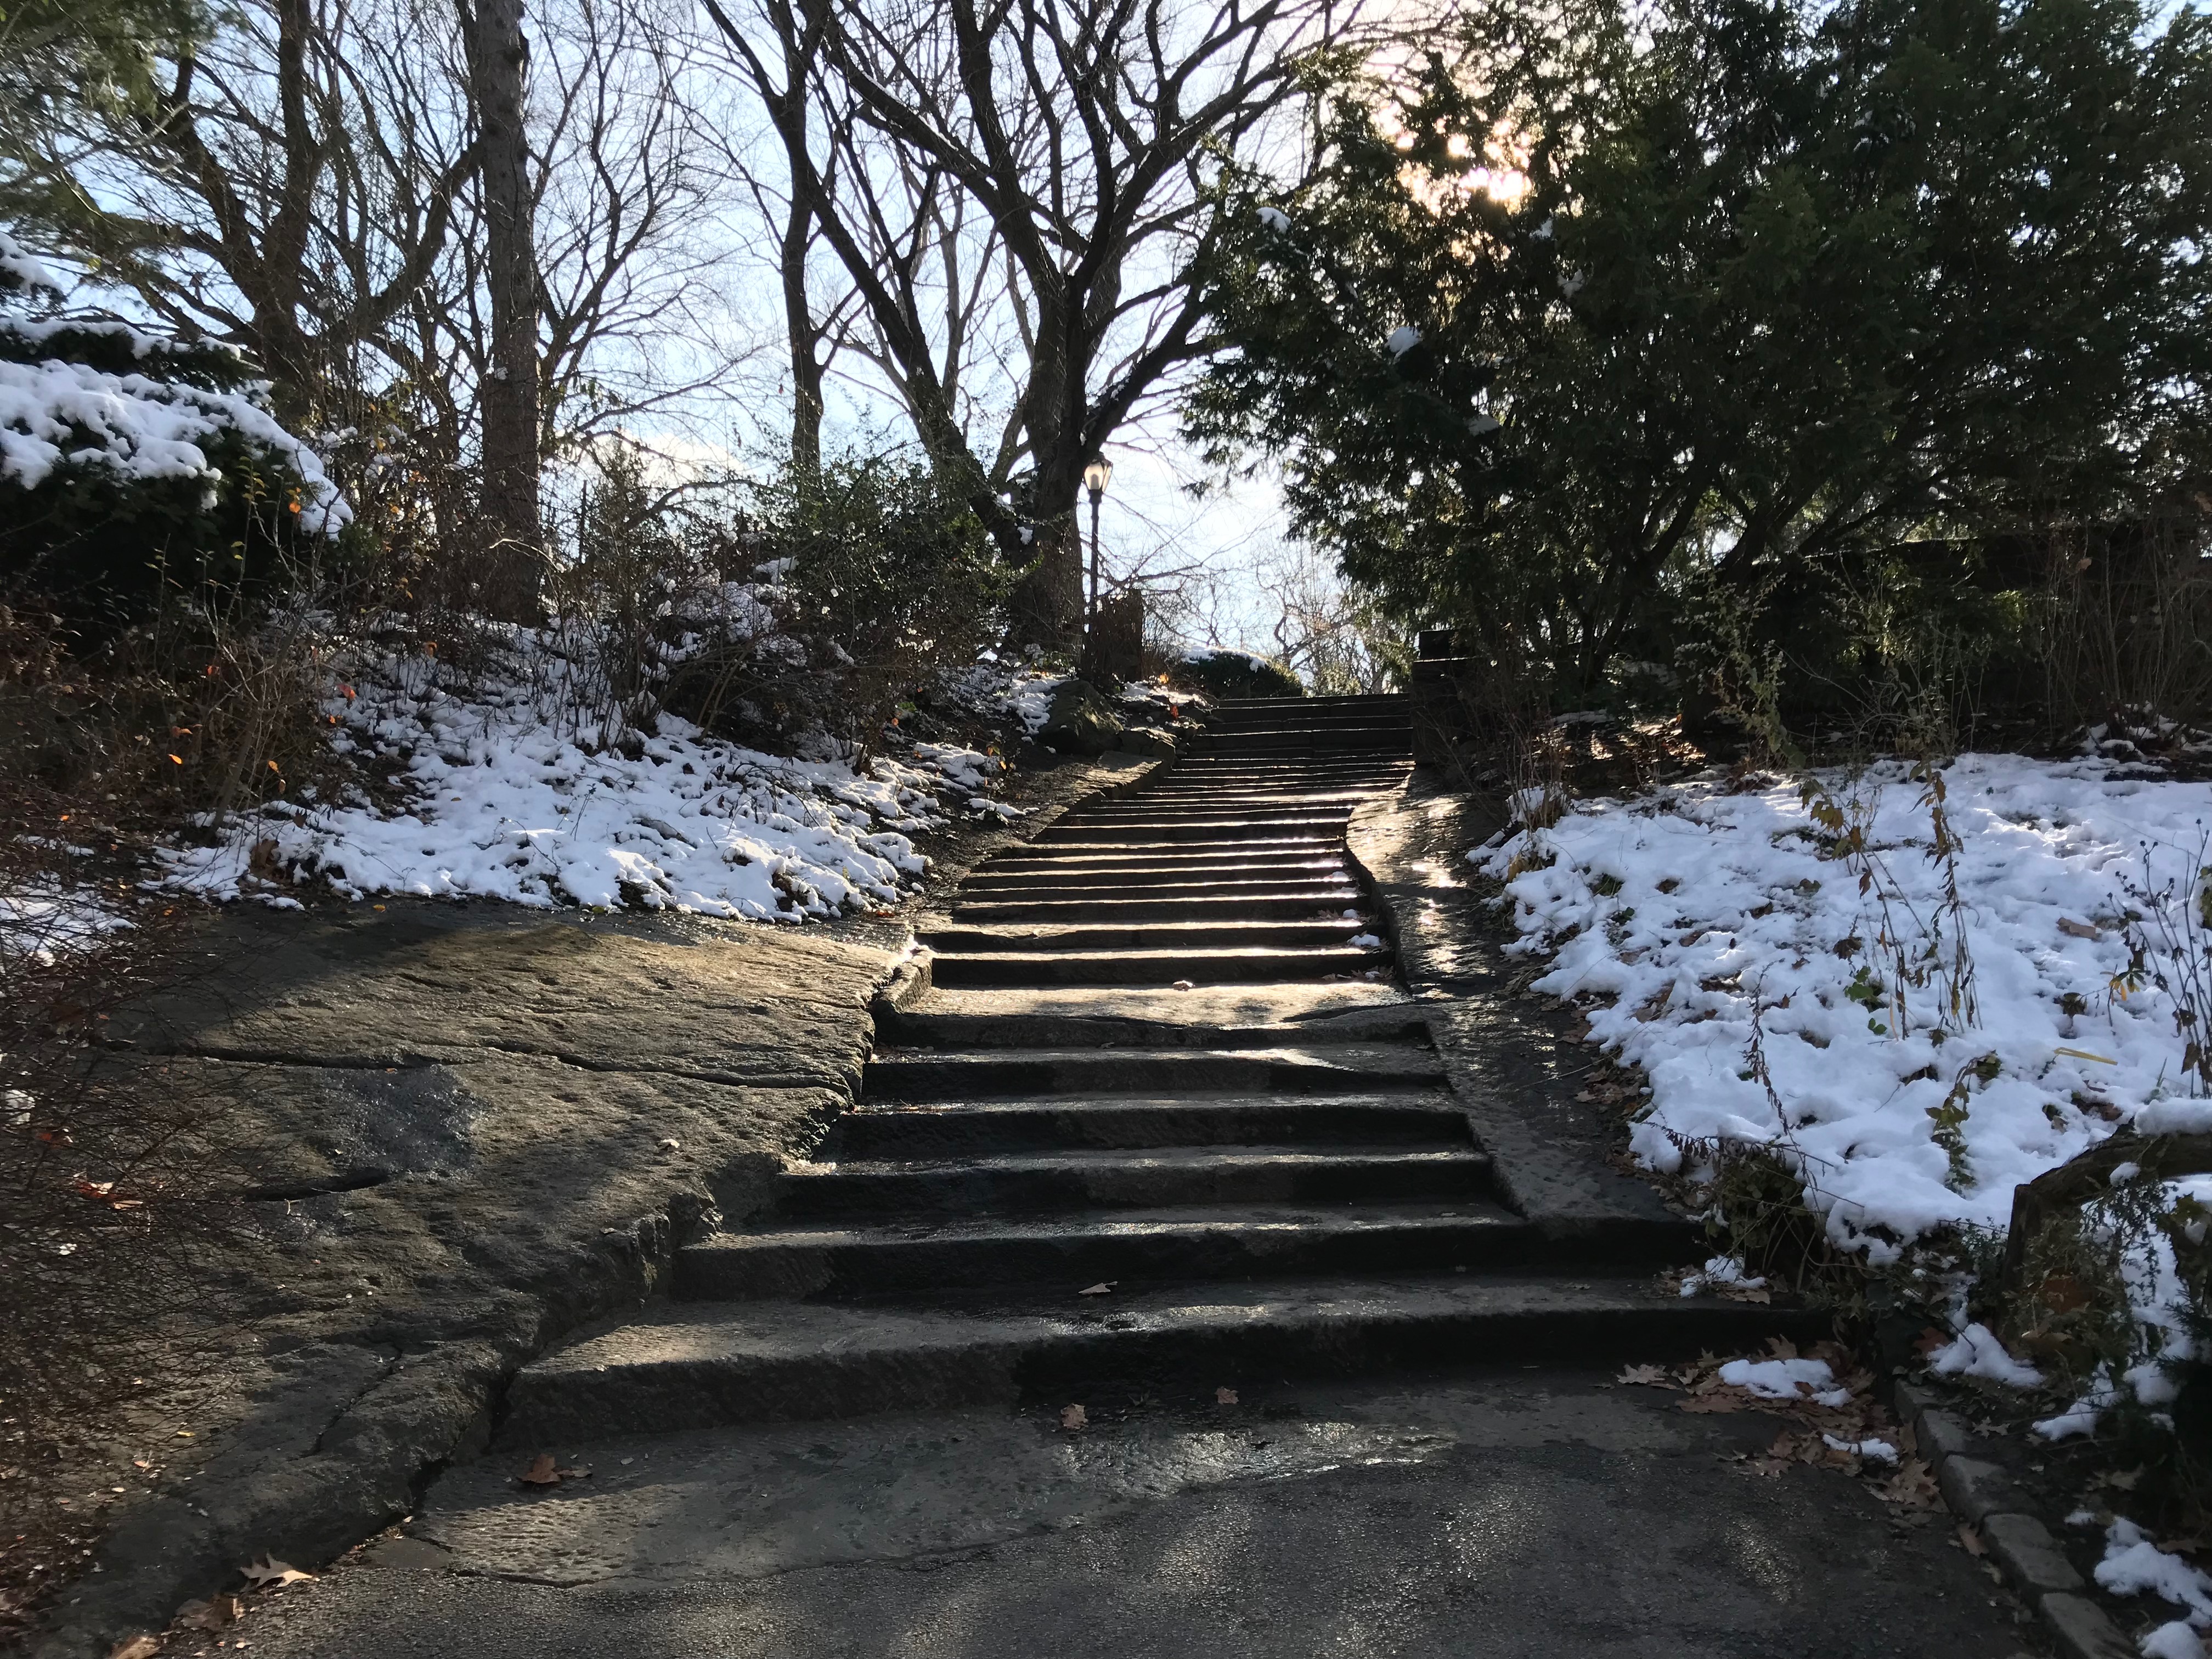 A stairway in the Shakespeare Garden in Central Park in New York City. (DCNF/Ethan Barton)